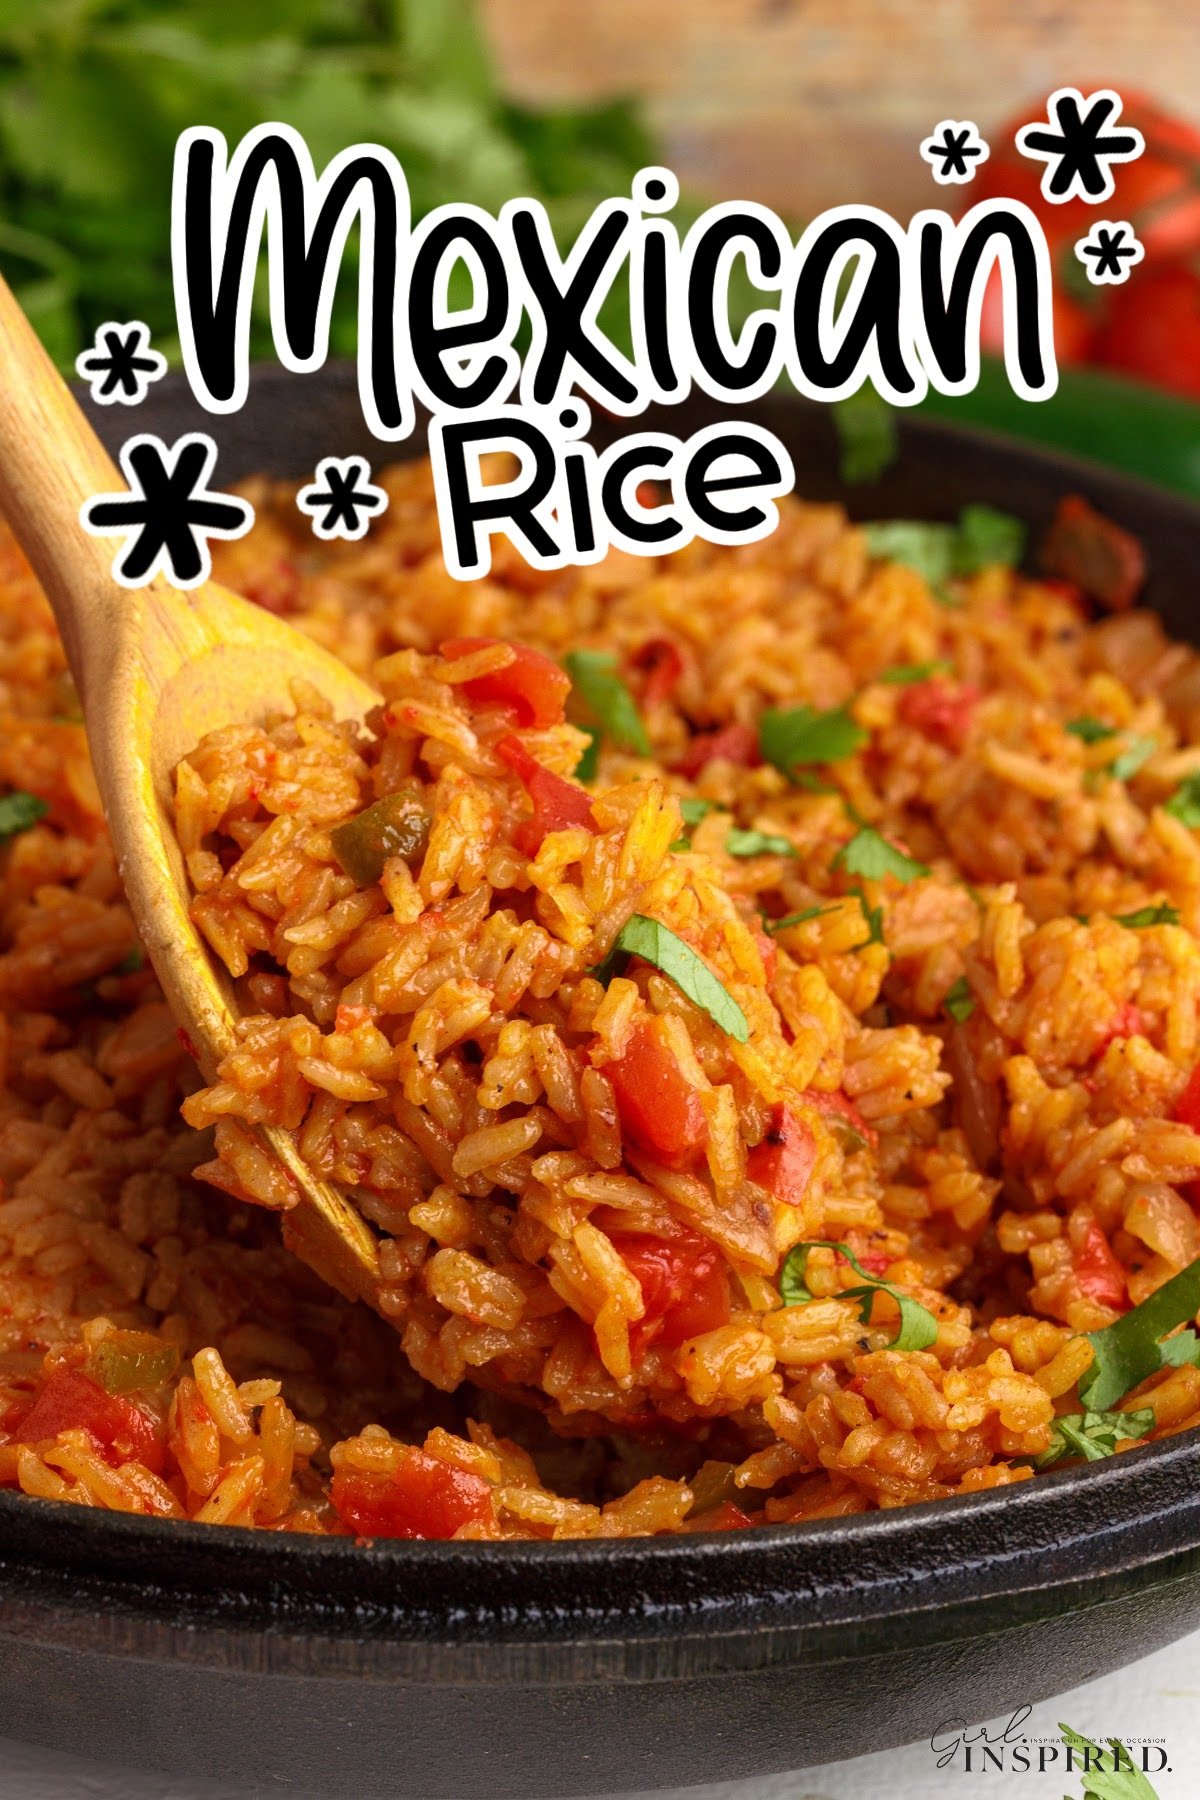 Pan of Mexican Red rice with a spoon full and text overlay.